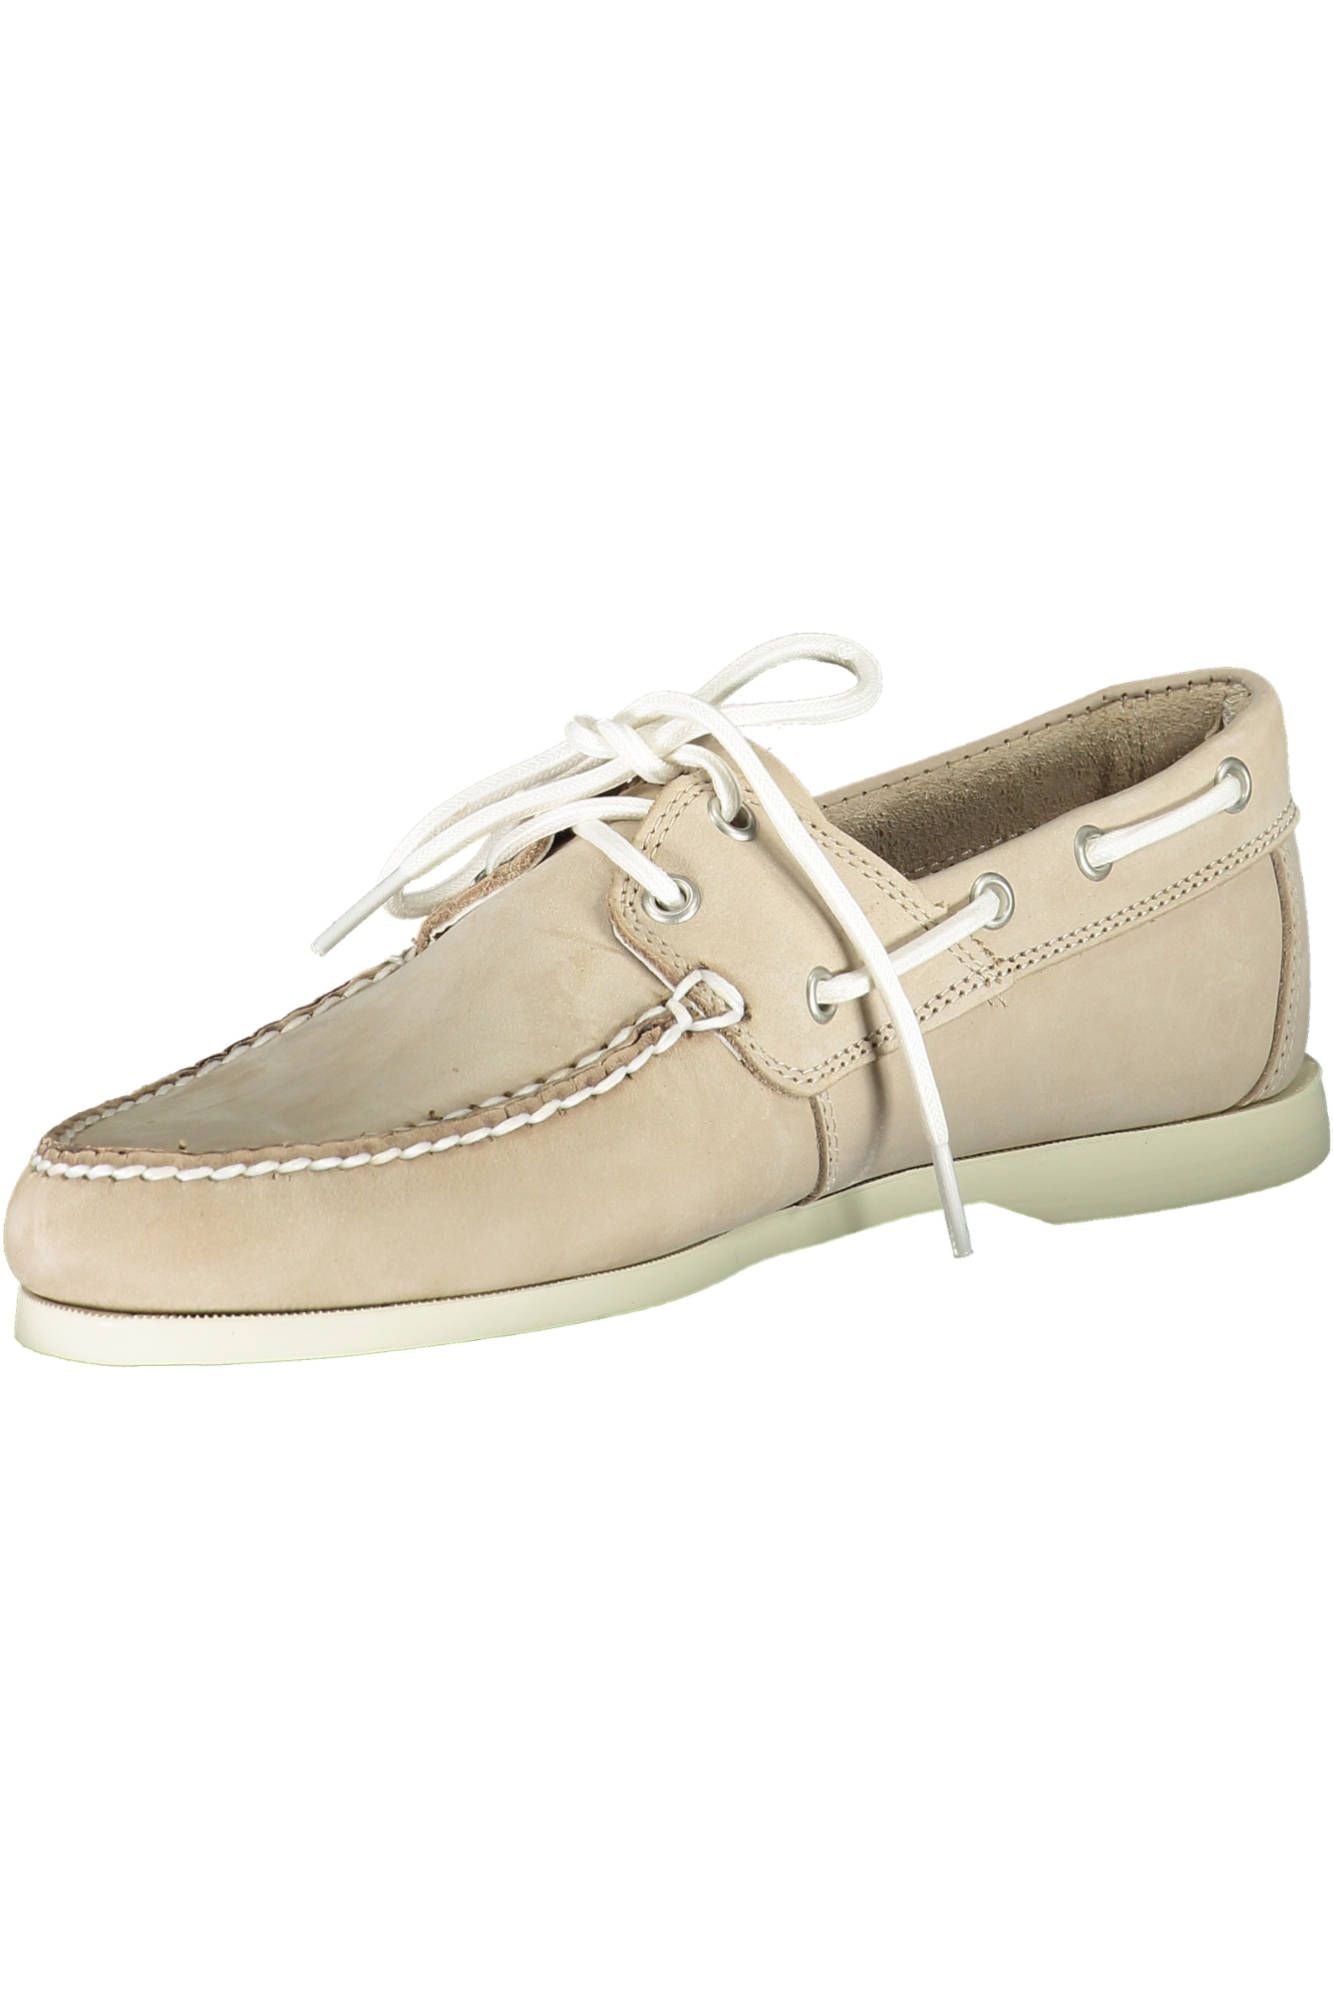 Chic Beige Leather Lace-Up Shoes with Contrasting Sole